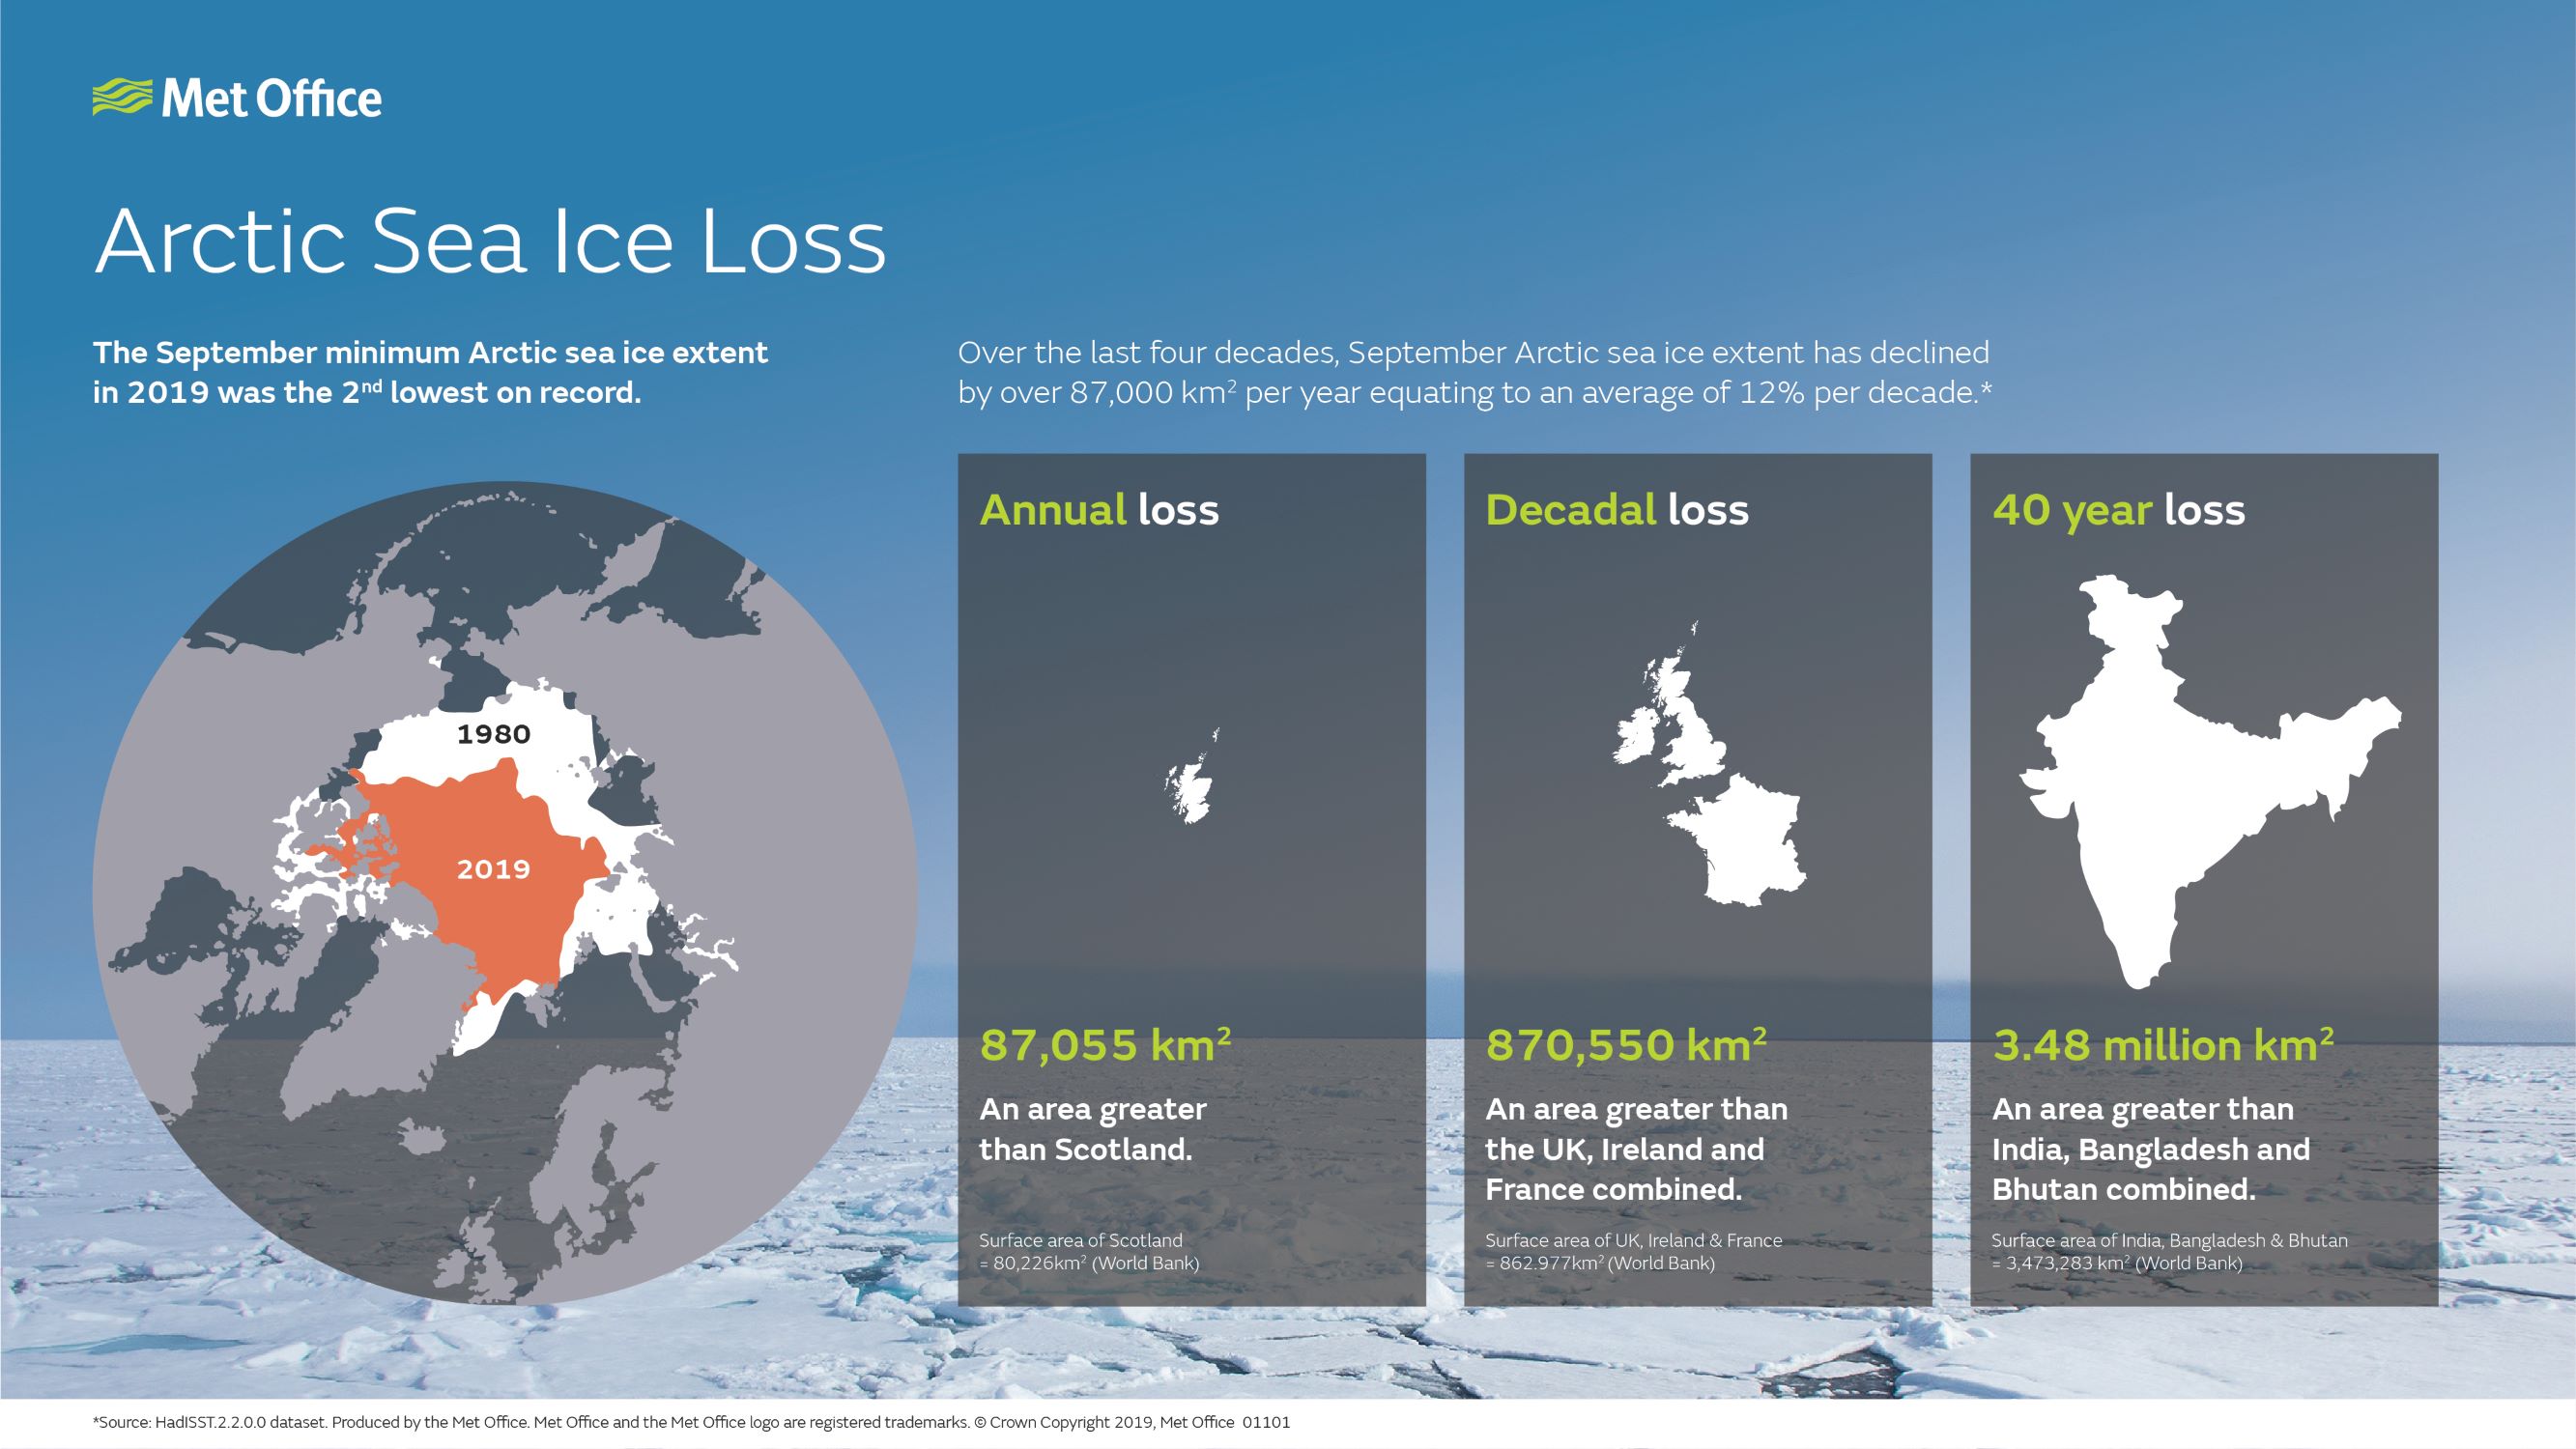 Infographic showing annual, decadal and 40 year Arctic sea ice loss. The September minimum Arctic sea ice extent in 2019 was the second lowest on record.